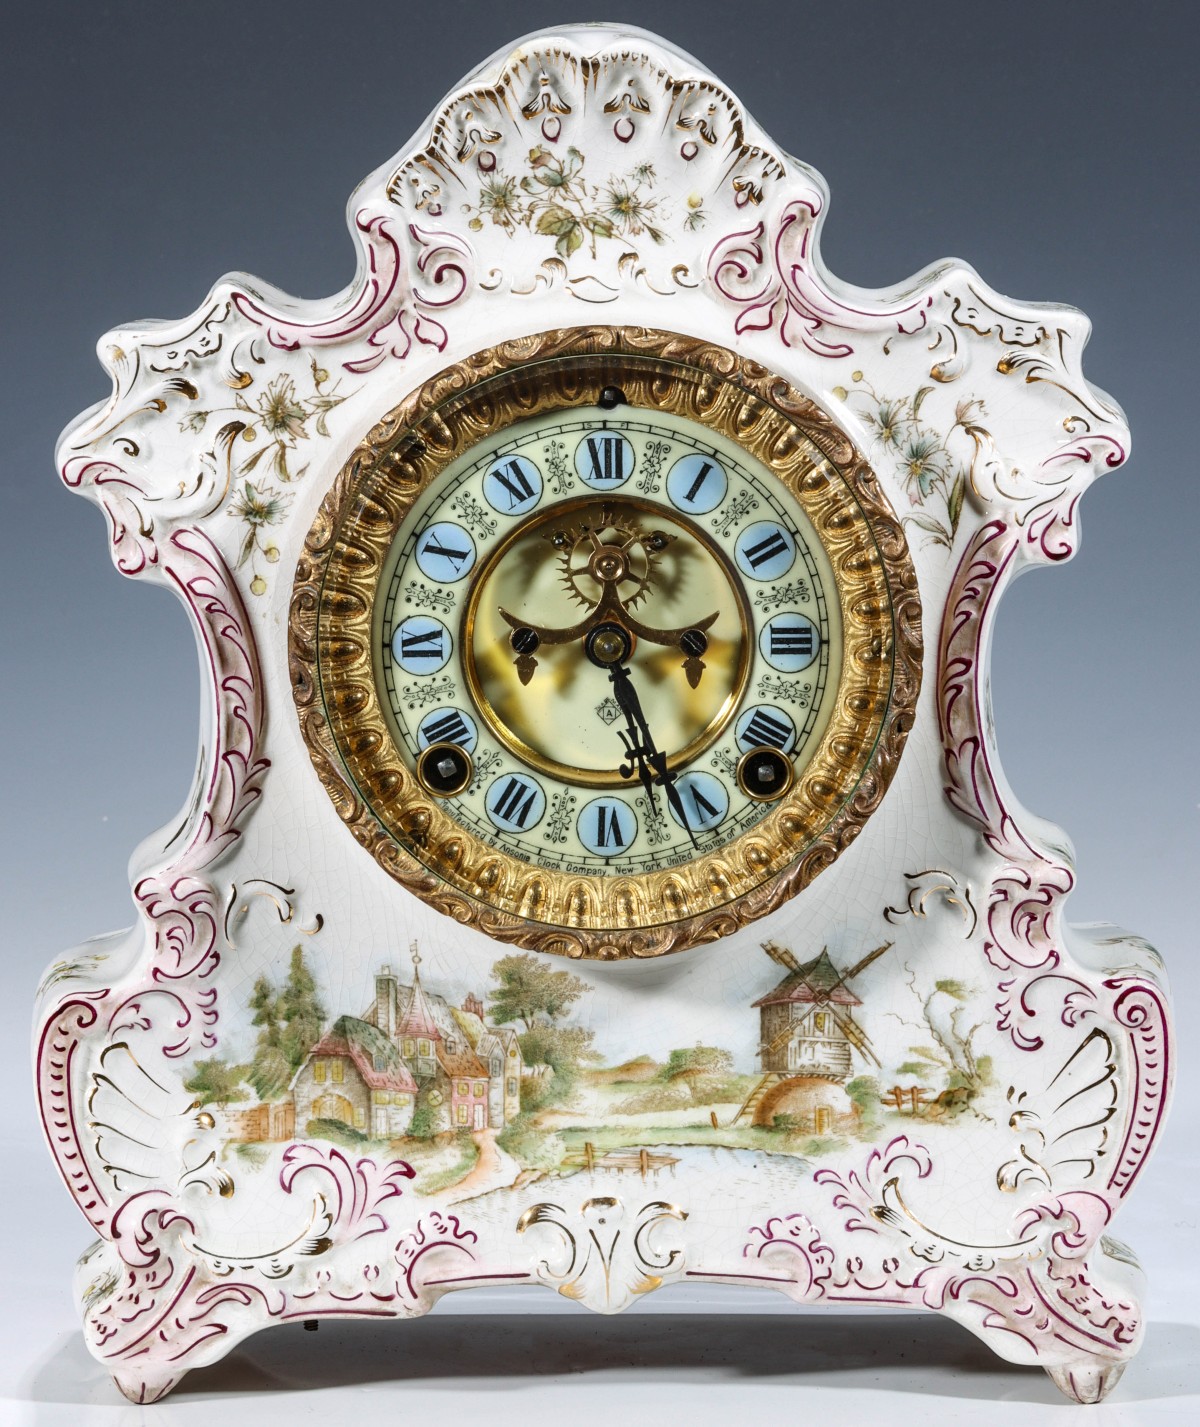 ANSONIA SARANAC MODEL CHINA CLOCK WITH TWO-COLOR DIAL